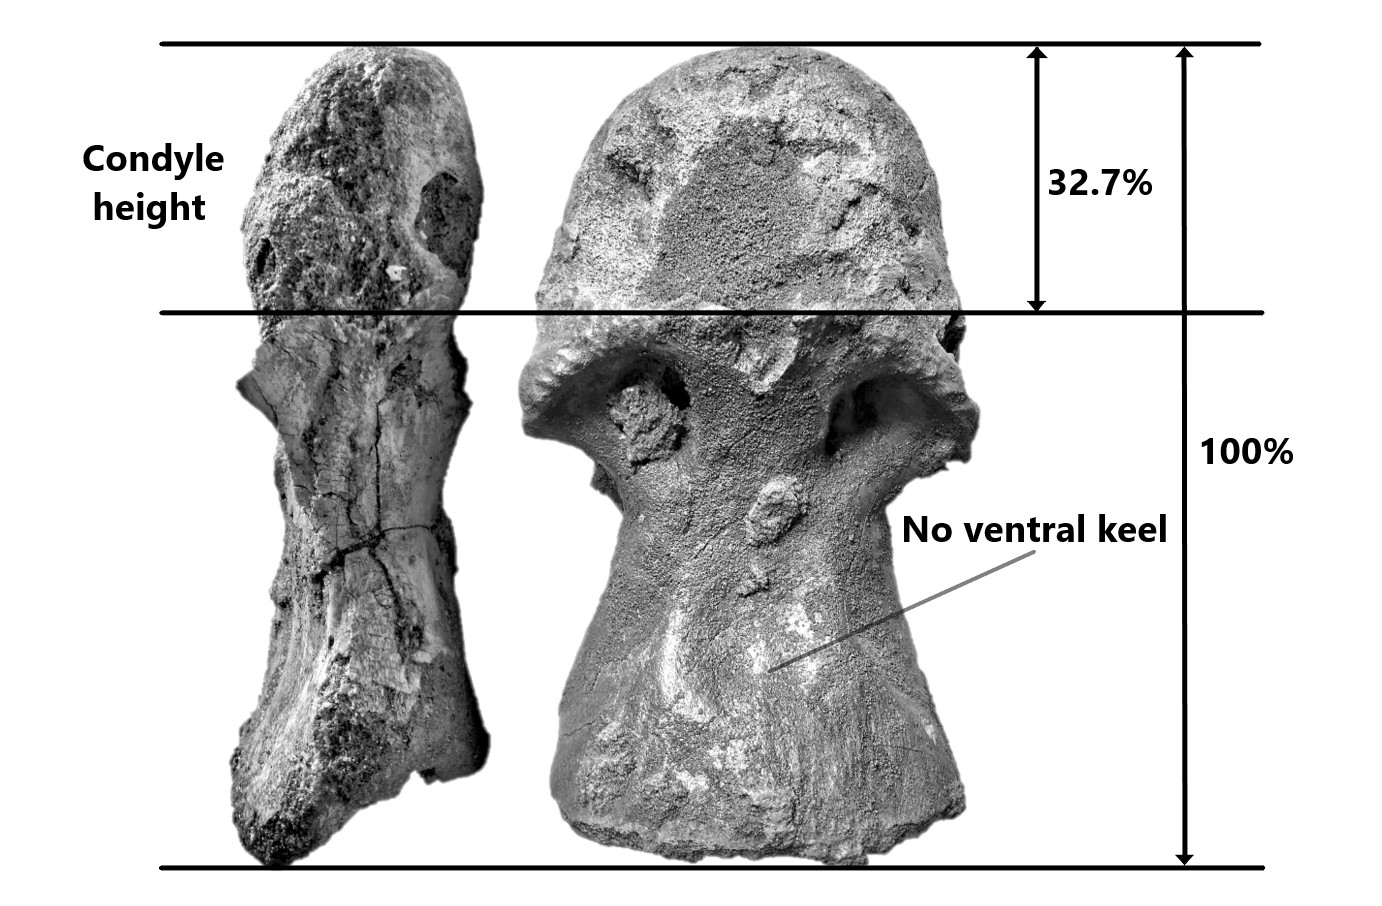 Cervical vertebra of Morocco Spinosaurid refer as Spinosaurus dorsojuvencus in ventral view. The condyle height composes about 32.7%± of total vertebra length, and no obvious ventral keel develop at bottom of the centrum.